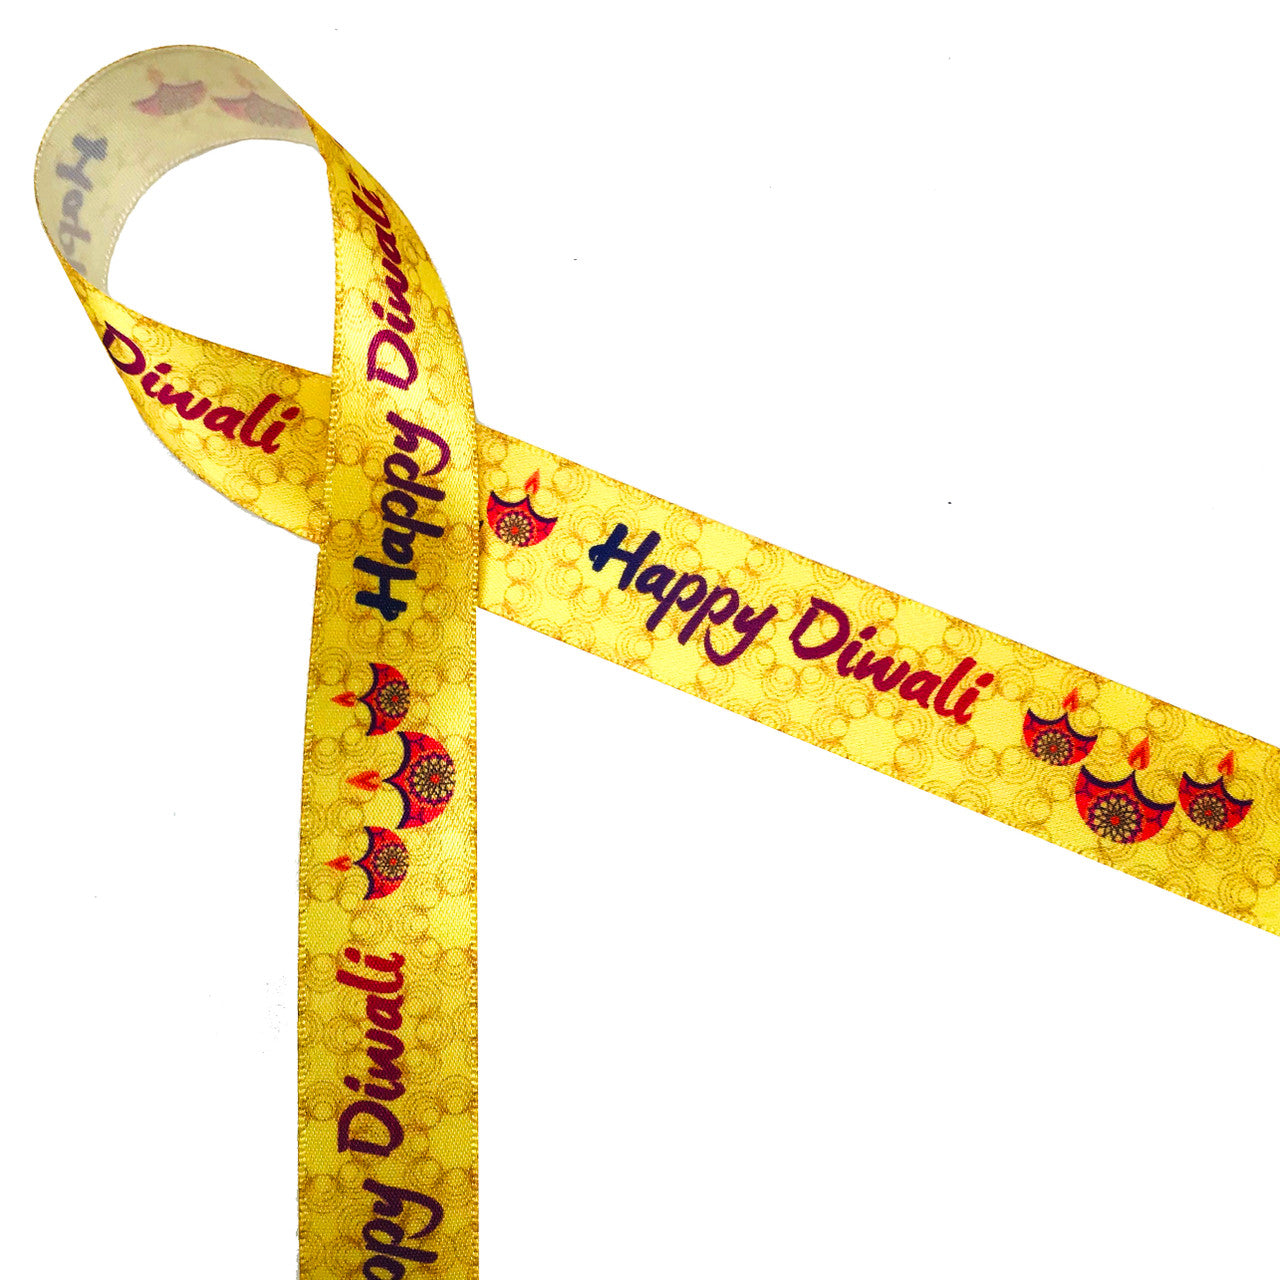 Happy Diwali ribbon with pink lamps on a yellow swirled background printed on7/8" white single face satin